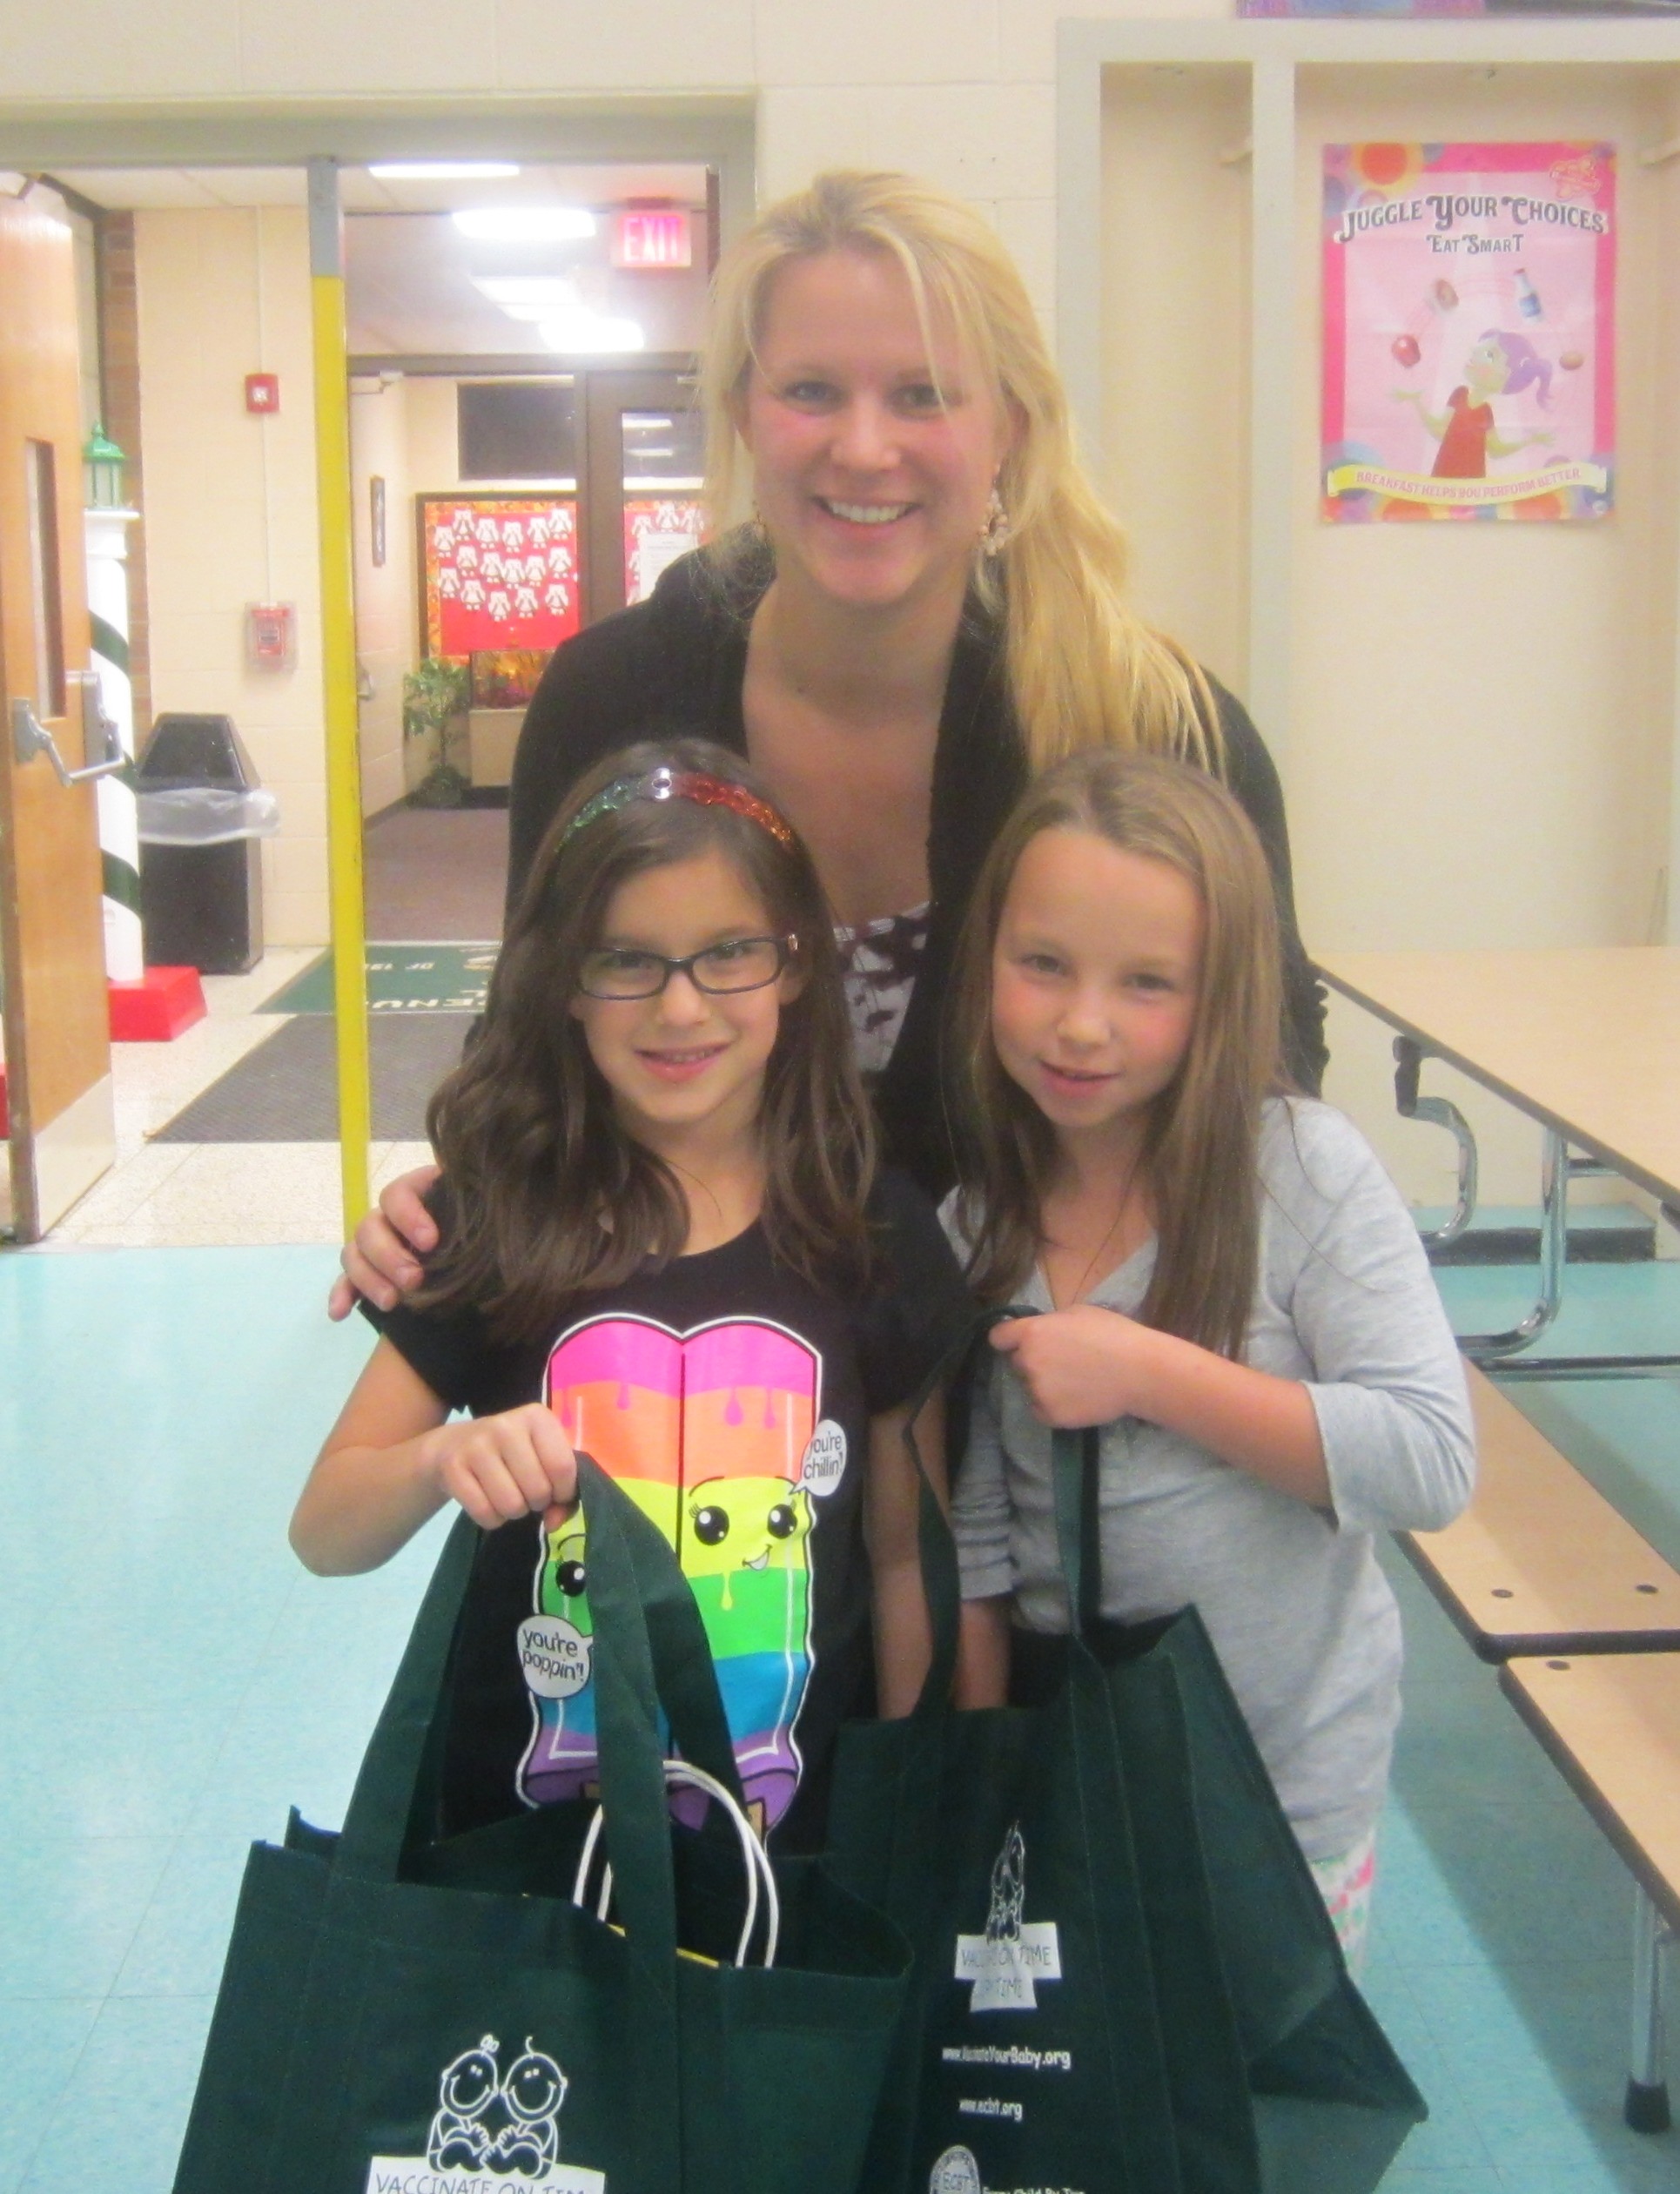 Melody Butler is pictured with two of the Kick the Flu Out of School contest participants.